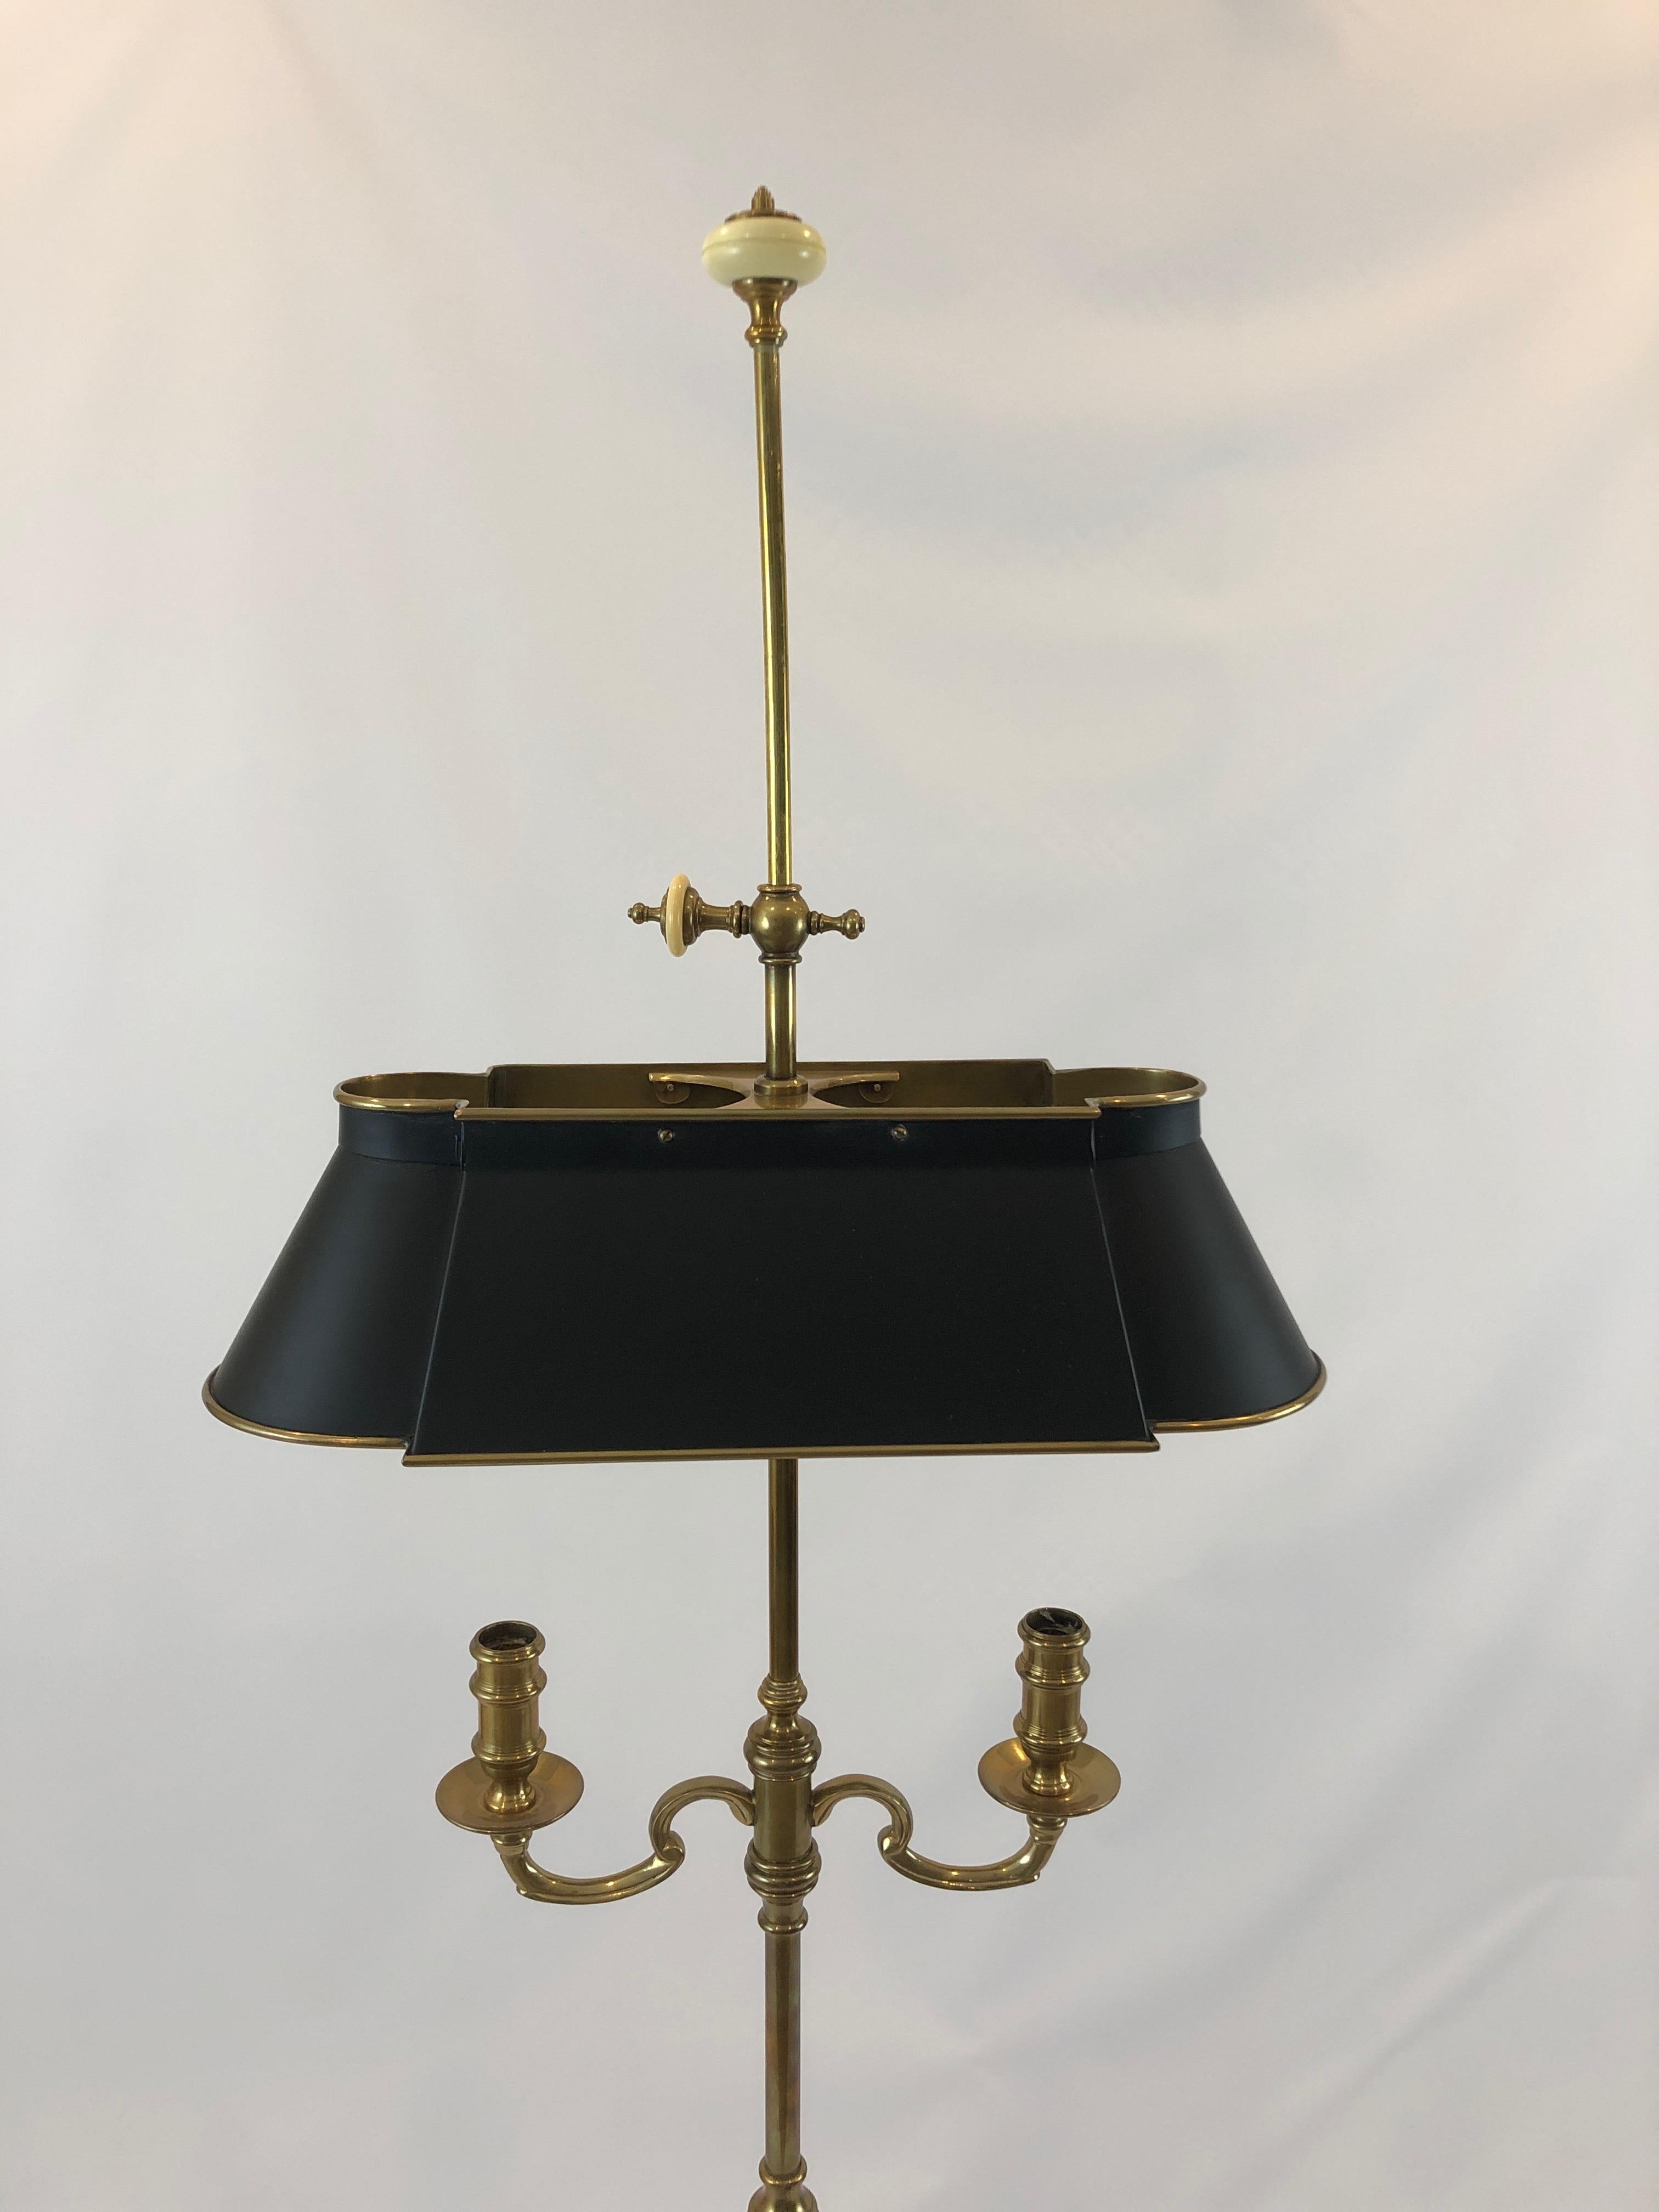 Handsome Chapman brass floor lamp in a versatile elegant medium size having 2 arm candlestick design, black and gold metal shade and sockets for two bulbs. Cream enamel finials are a nice touch.